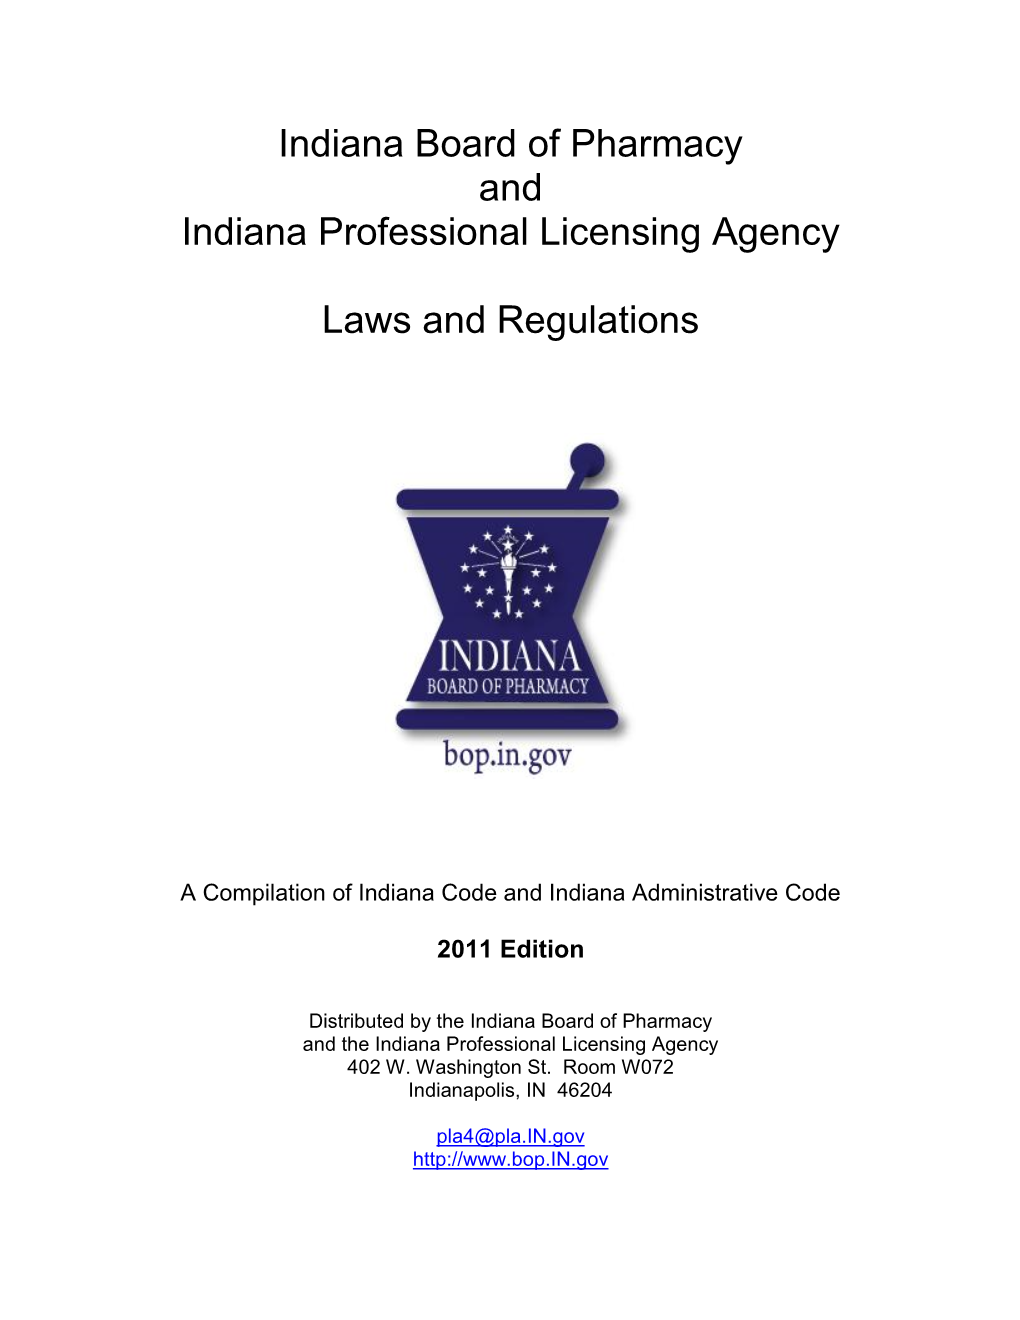 Indiana Pharmacy Laws and Regulations